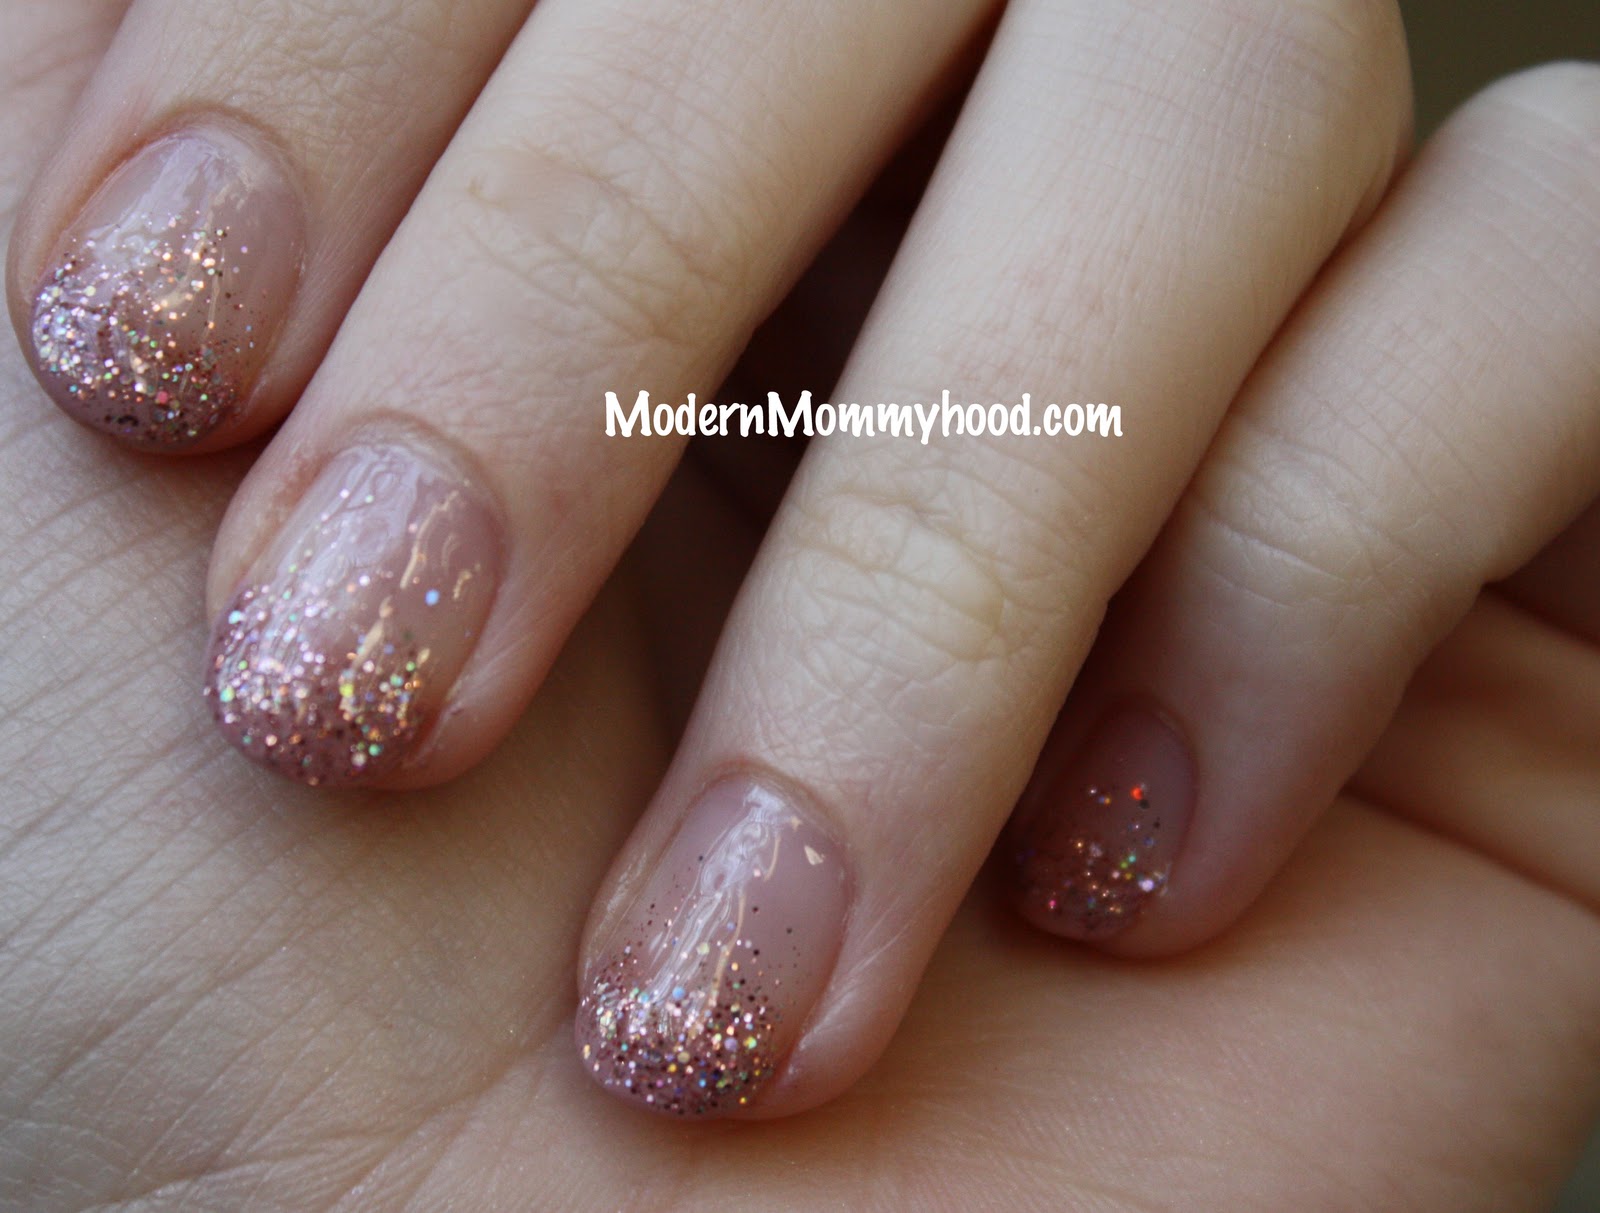 Quirky  11  Golden Glitter Tips  Short Square  Alps Nail Art